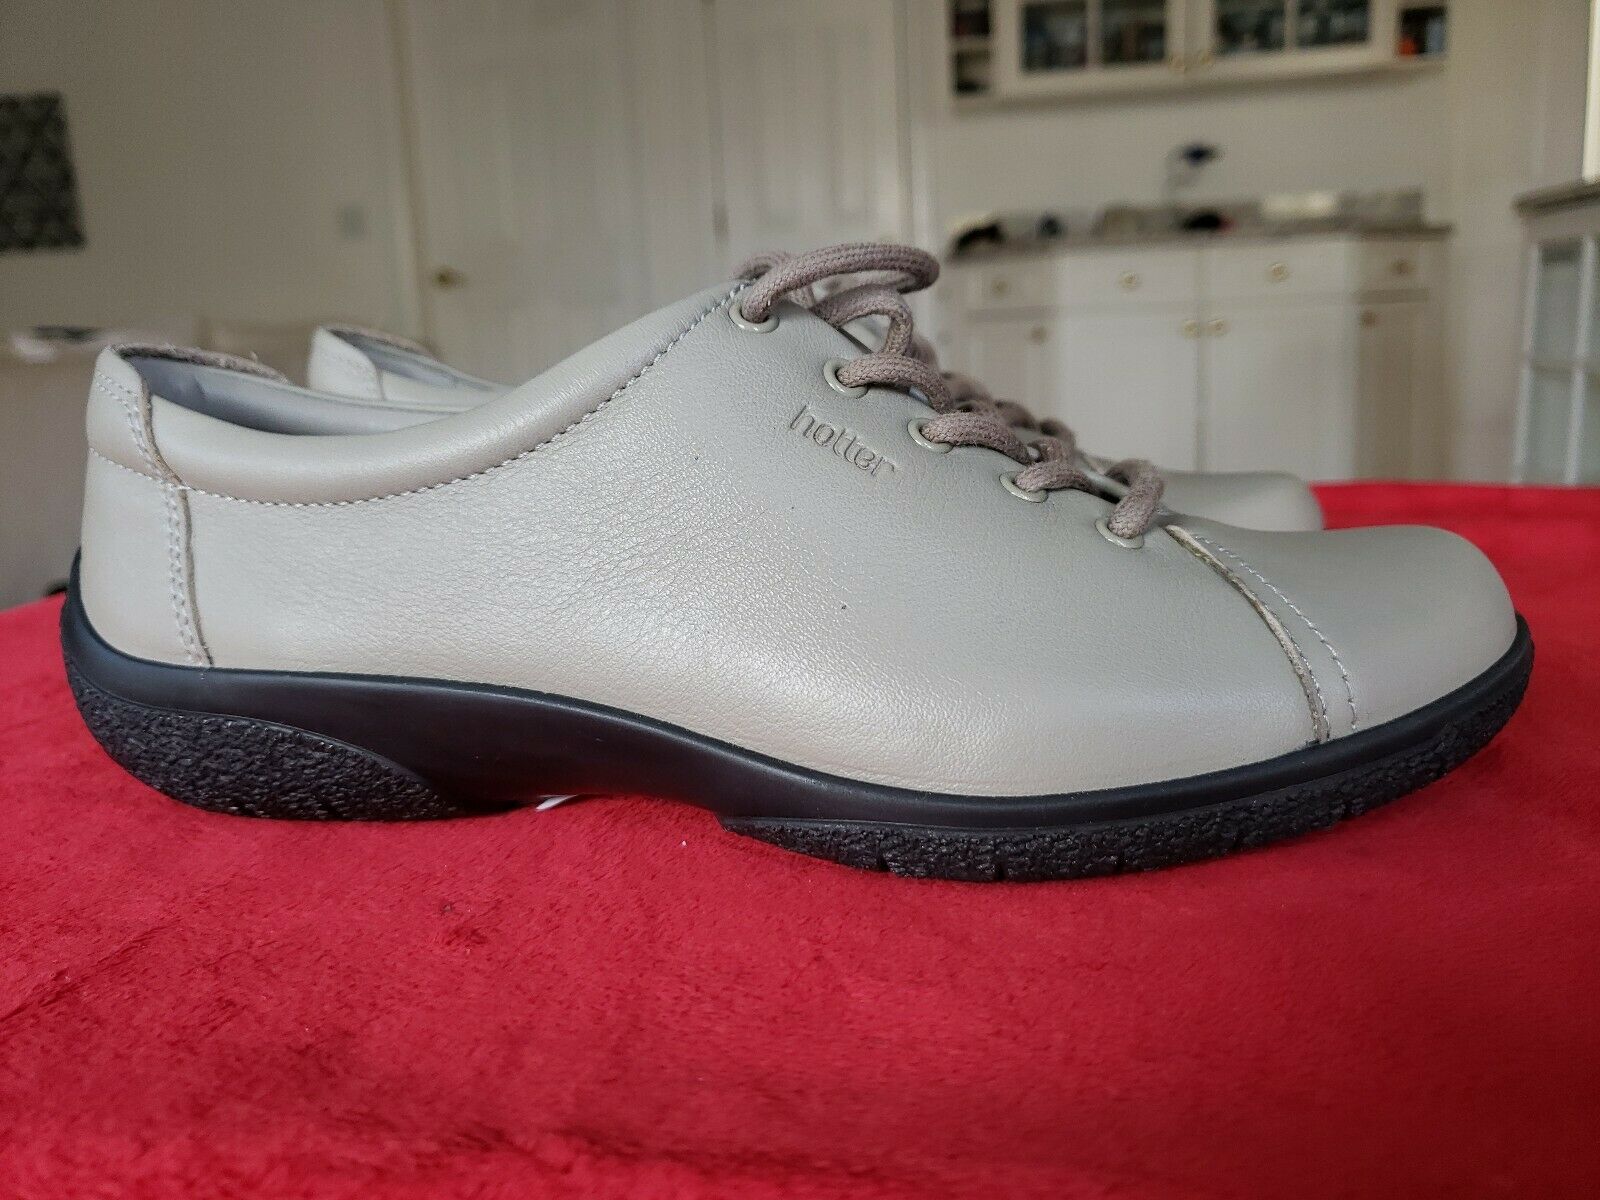 Hotter Women's Lace Up Leather Walking Shoes Size 7 Grey Dew. New without Box